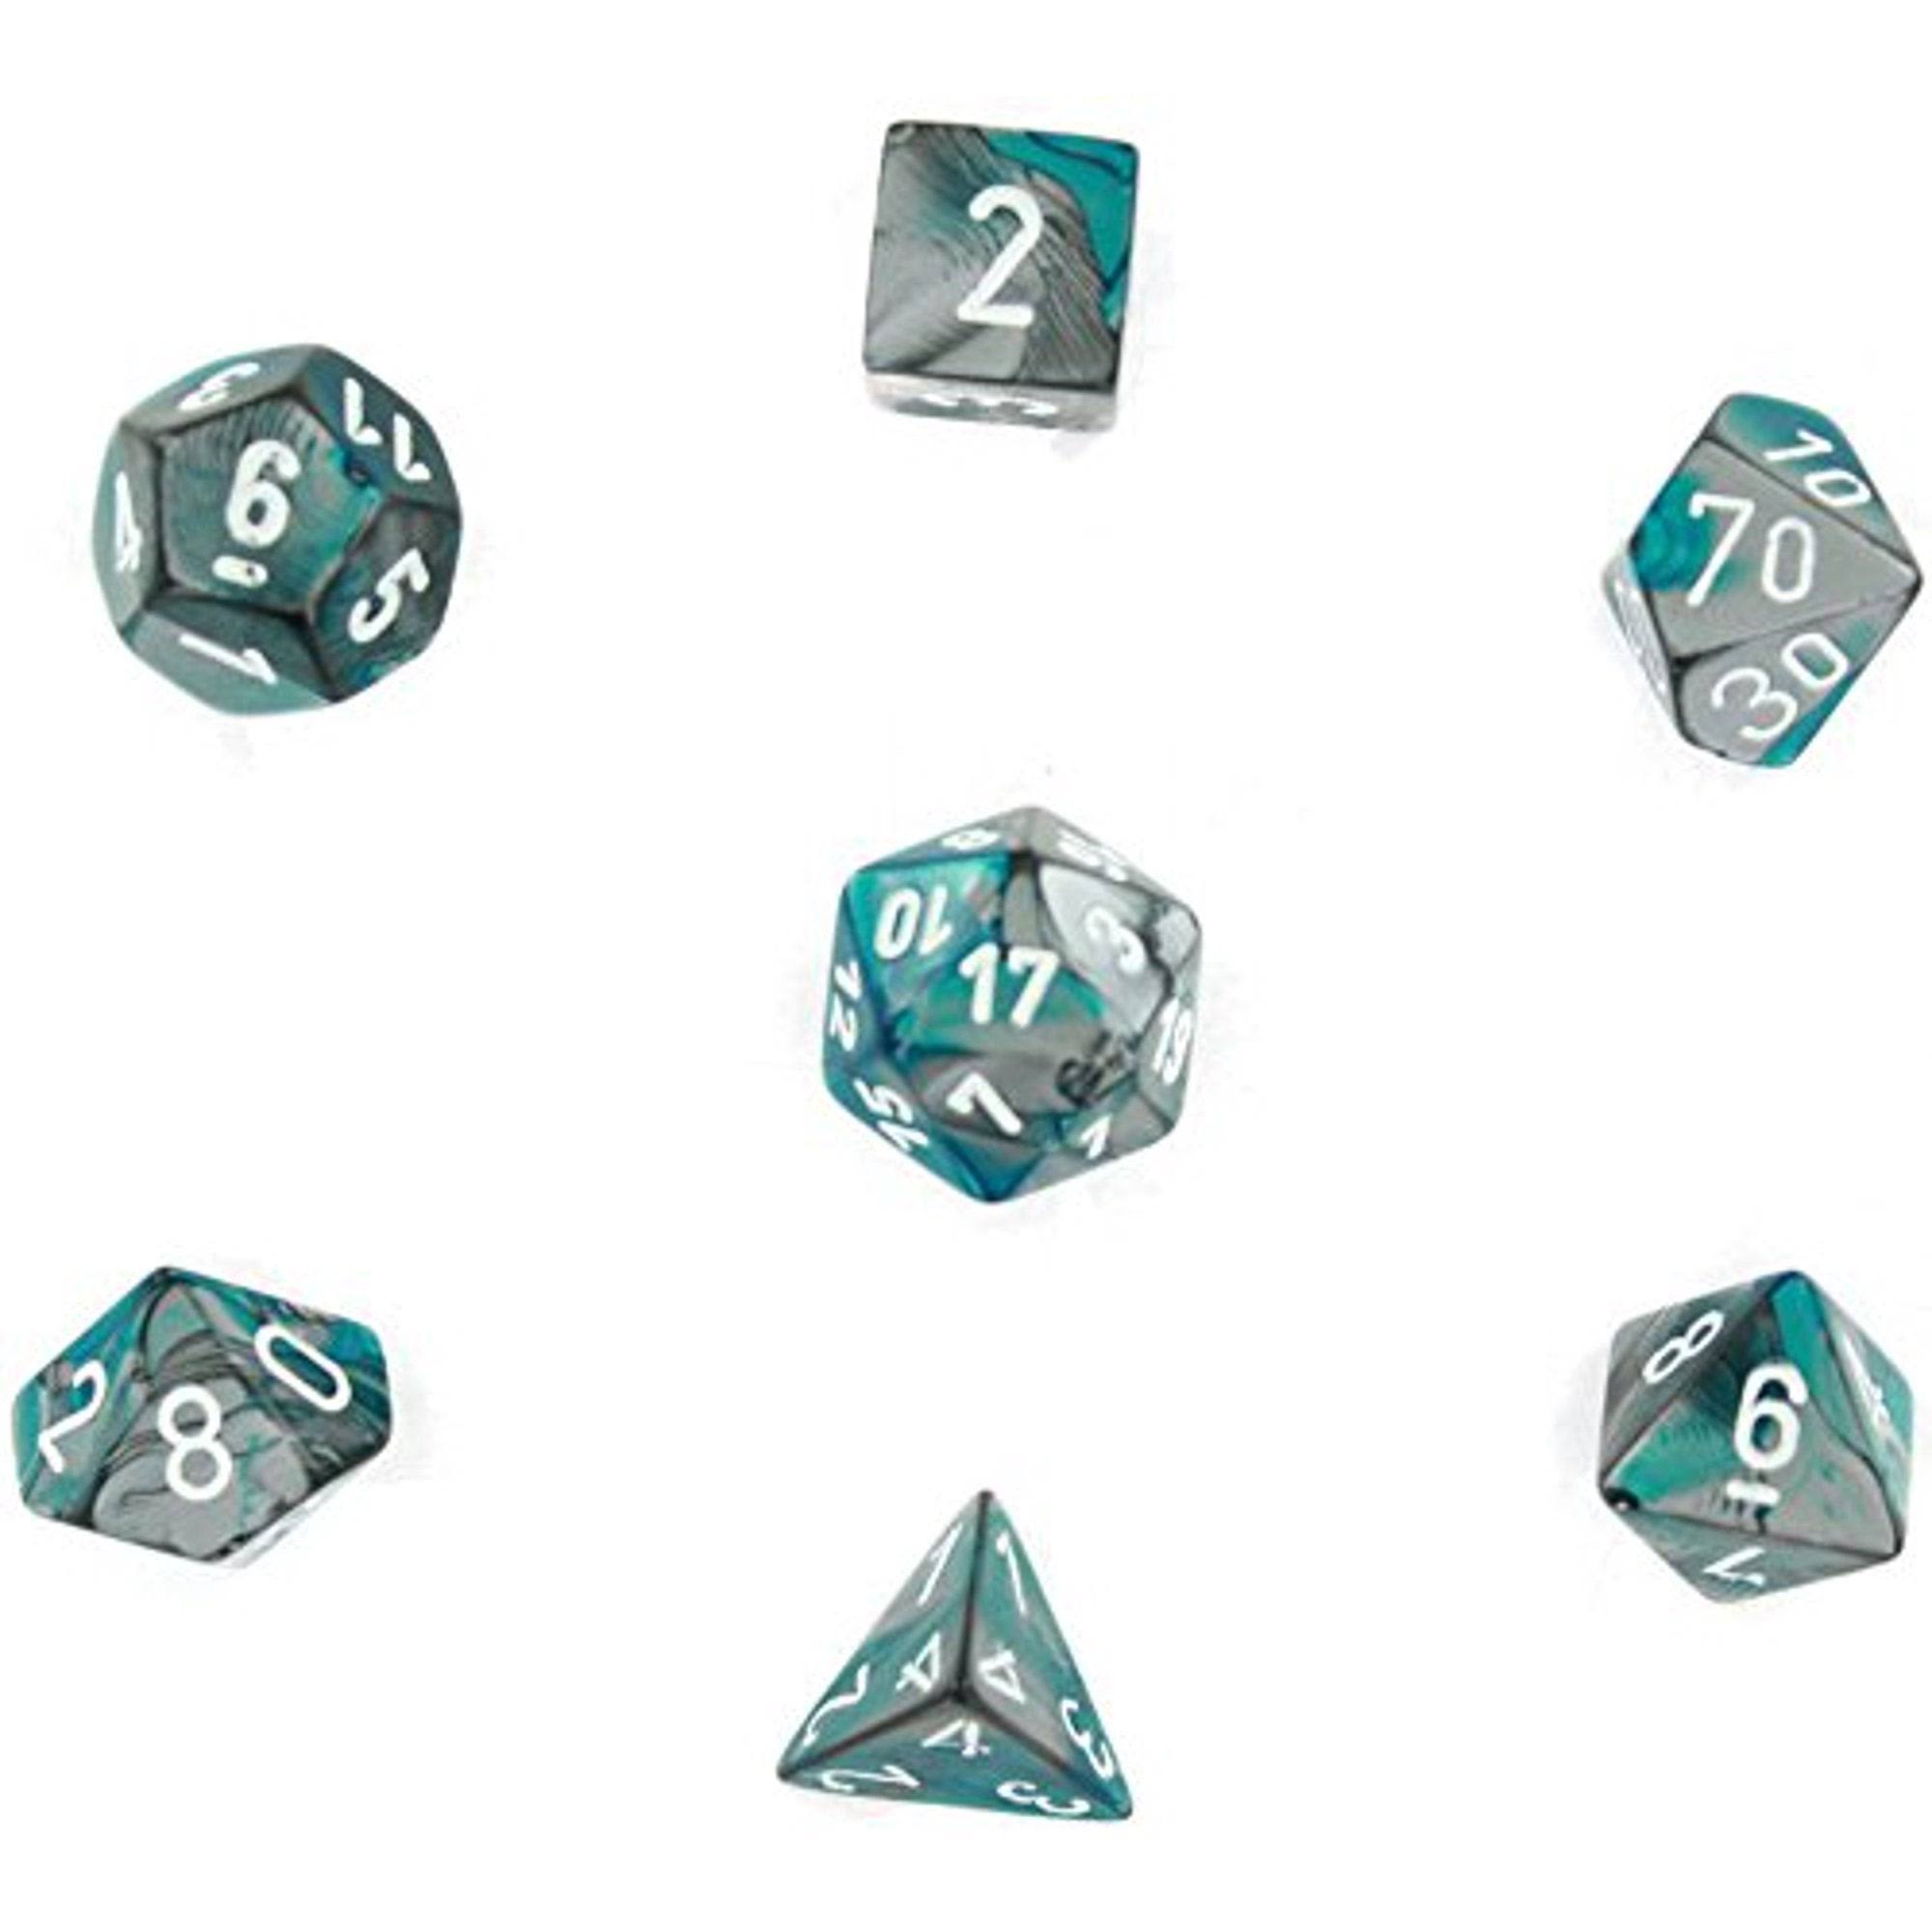 Chessex Gemini Poly 7 Dice Set: Steel-Teal/White